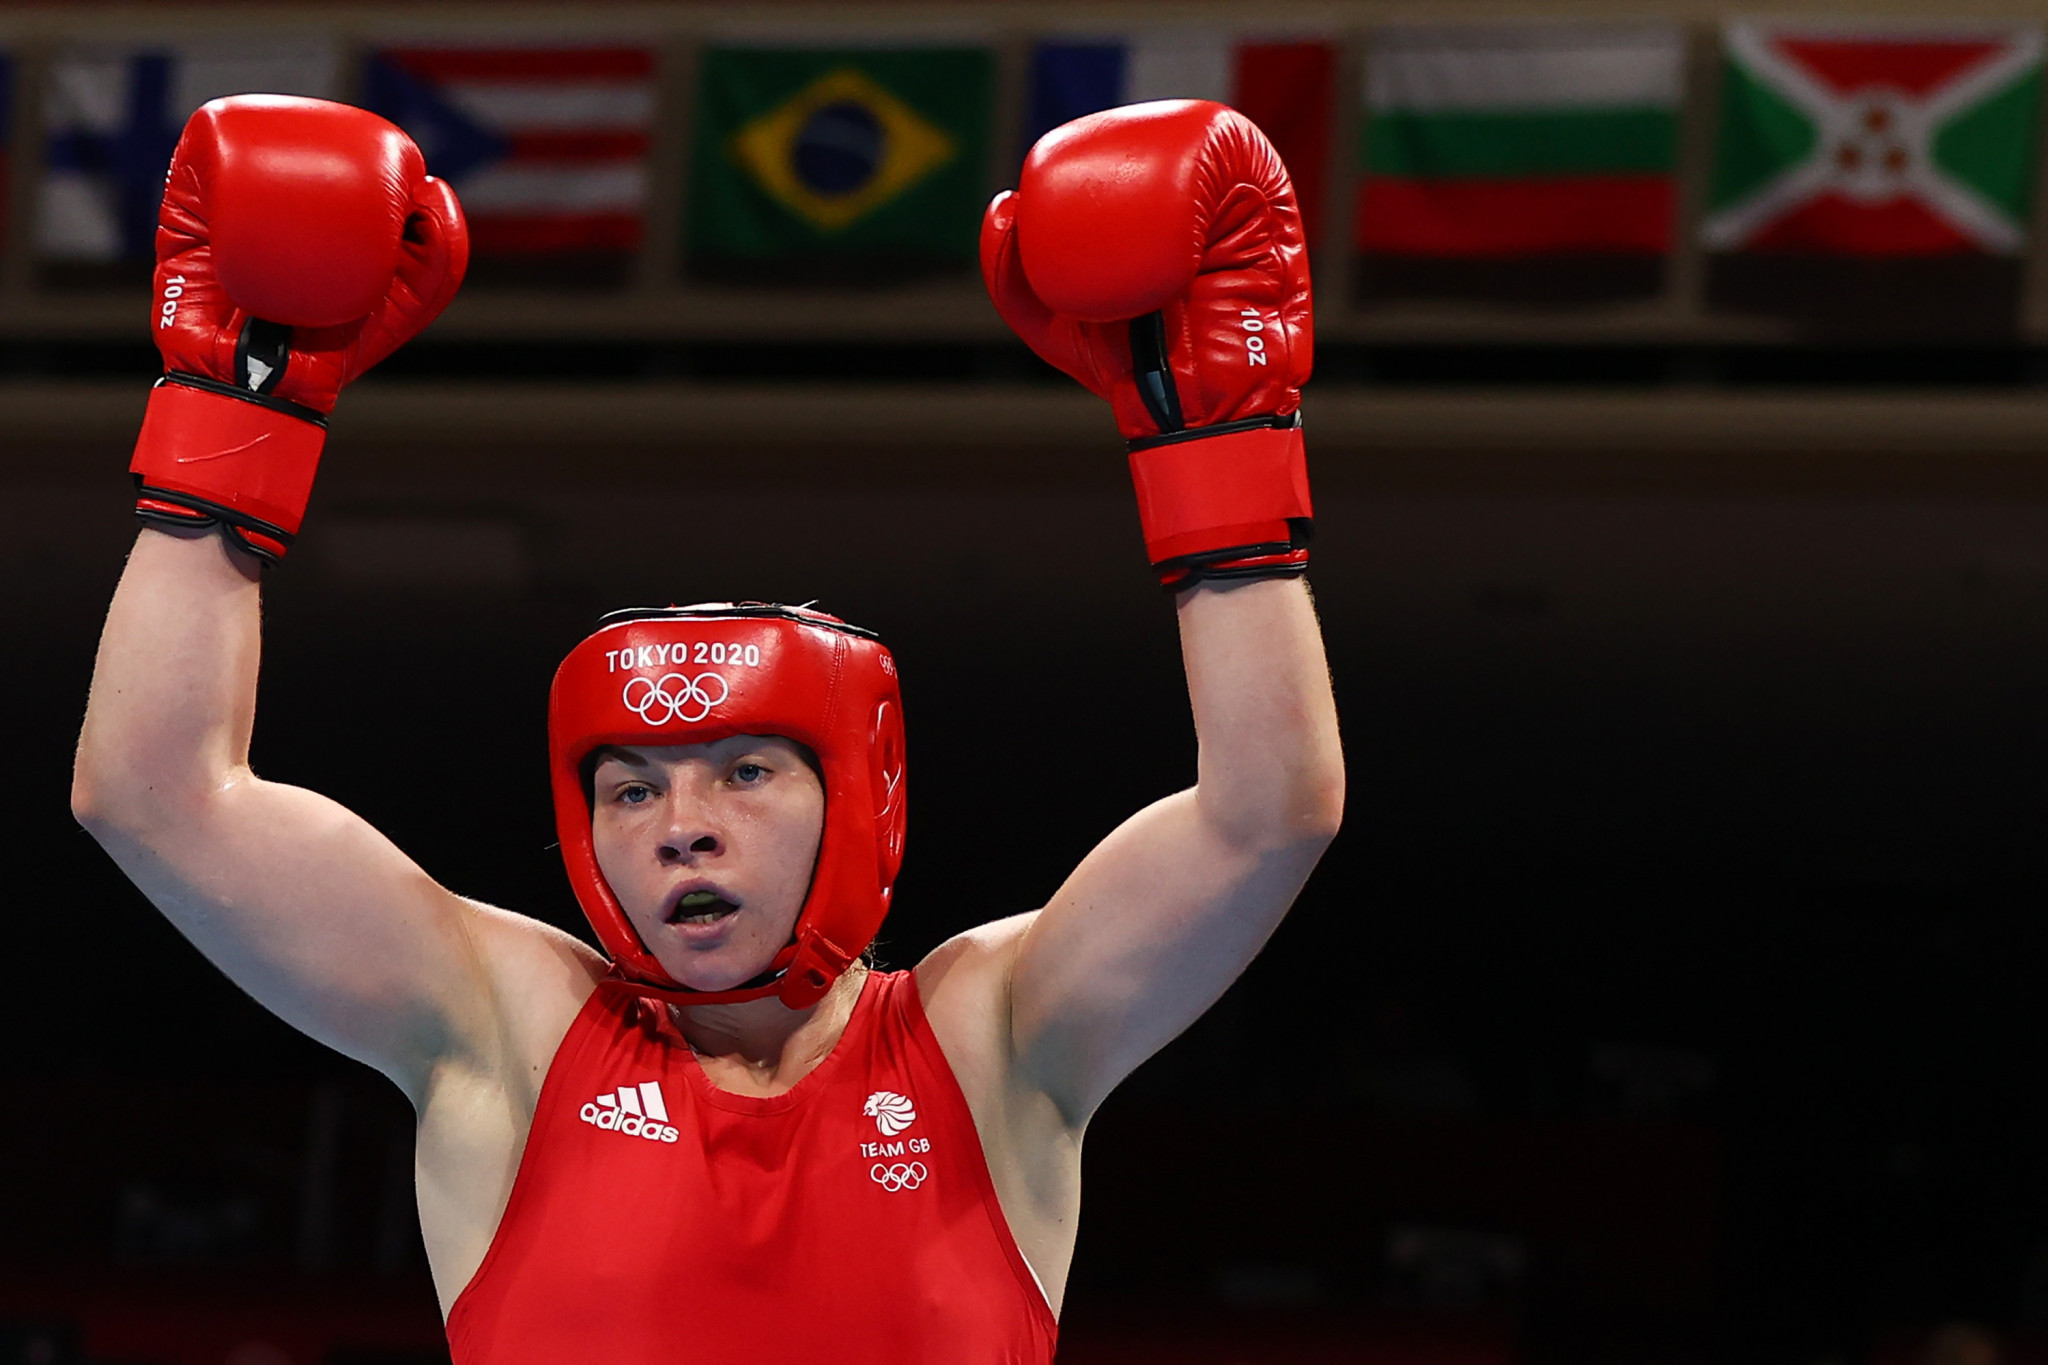 Lauren Price has said she intends to turn to professional boxing after winning Olympic gold for Britain at Tokyo 2020 ©Getty Images